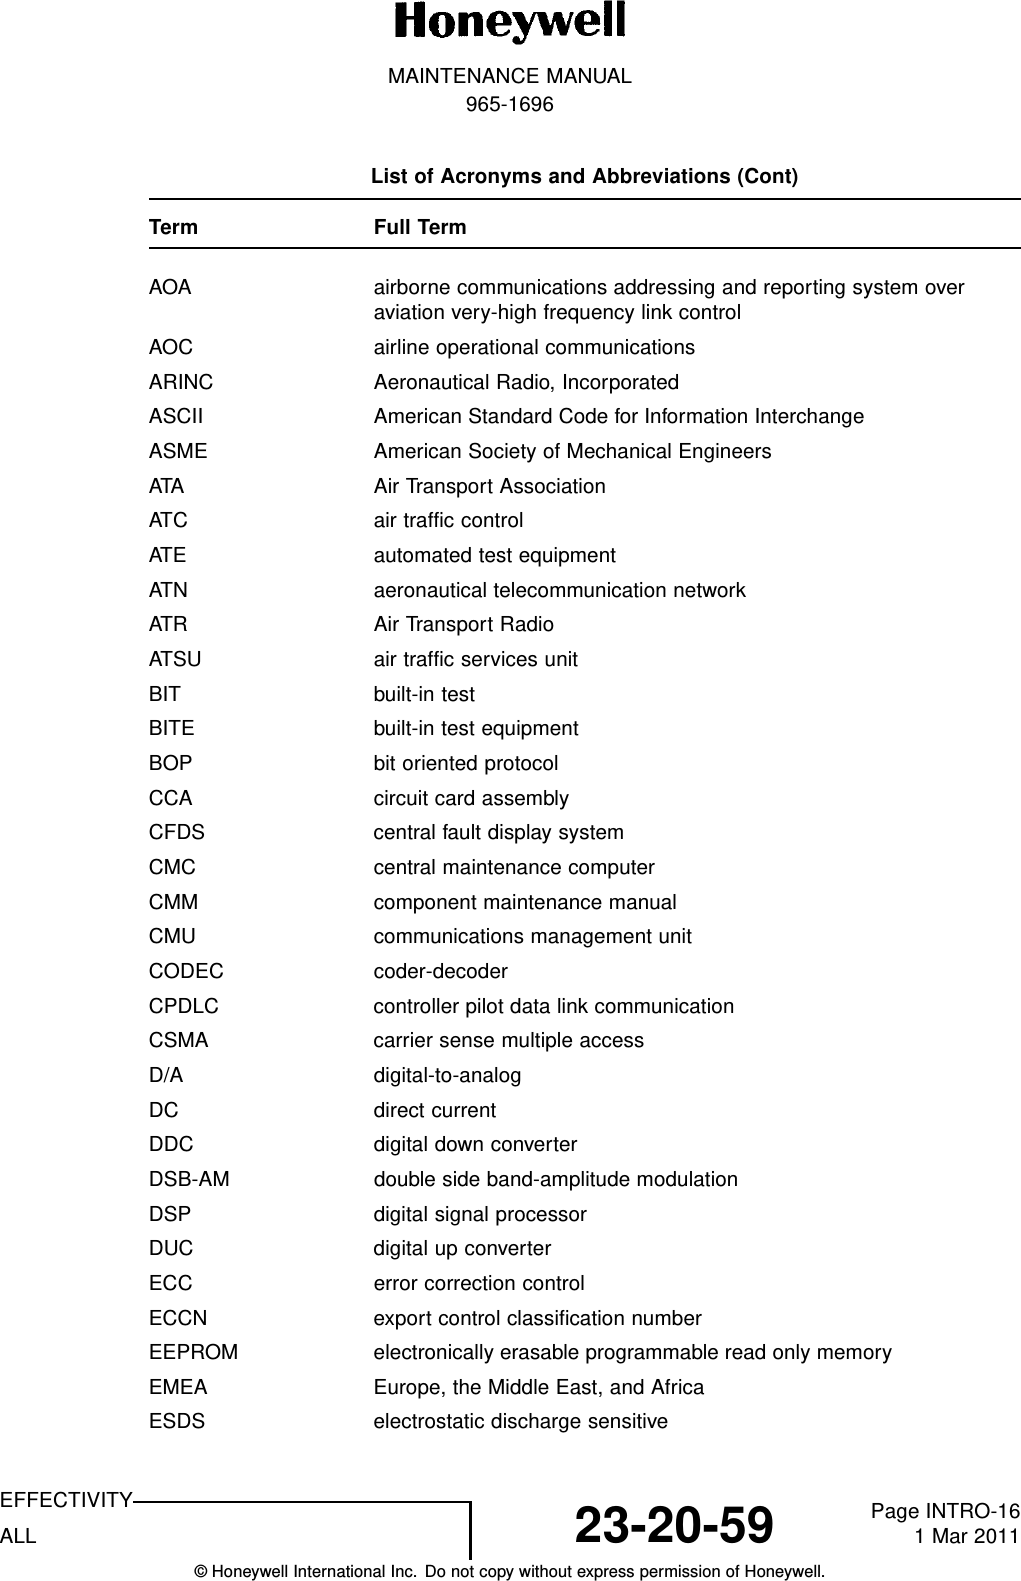 MAINTENANCE MANUAL965-1696List of Acronyms and Abbreviations (Cont)Term Full TermAOA airborne communications addressing and reporting system overaviation very-high frequency link controlAOC airline operational communicationsARINC Aeronautical Radio, IncorporatedASCII American Standard Code for Information InterchangeASME American Society of Mechanical EngineersATA Air Transport AssociationATC air traffic controlATE automated test equipmentATN aeronautical telecommunication networkATR Air Transport RadioATSU air traffic services unitBIT built-in testBITE built-in test equipmentBOP bit oriented protocolCCA circuit card assemblyCFDS central fault display systemCMC central maintenance computerCMM component maintenance manualCMU communications management unitCODEC coder-decoderCPDLC controller pilot data link communicationCSMA carrier sense multiple accessD/A digital-to-analogDC direct currentDDC digital down converterDSB-AM double side band-amplitude modulationDSP digital signal processorDUC digital up converterECC error correction controlECCN export control classification numberEEPROM electronically erasable programmable read only memoryEMEA Europe, the Middle East, and AfricaESDS electrostatic discharge sensitiveEFFECTIVITYALL 23-20-59 Page INTRO-161 Mar 2011© Honeywell International Inc. Do not copy without express permission of Honeywell.